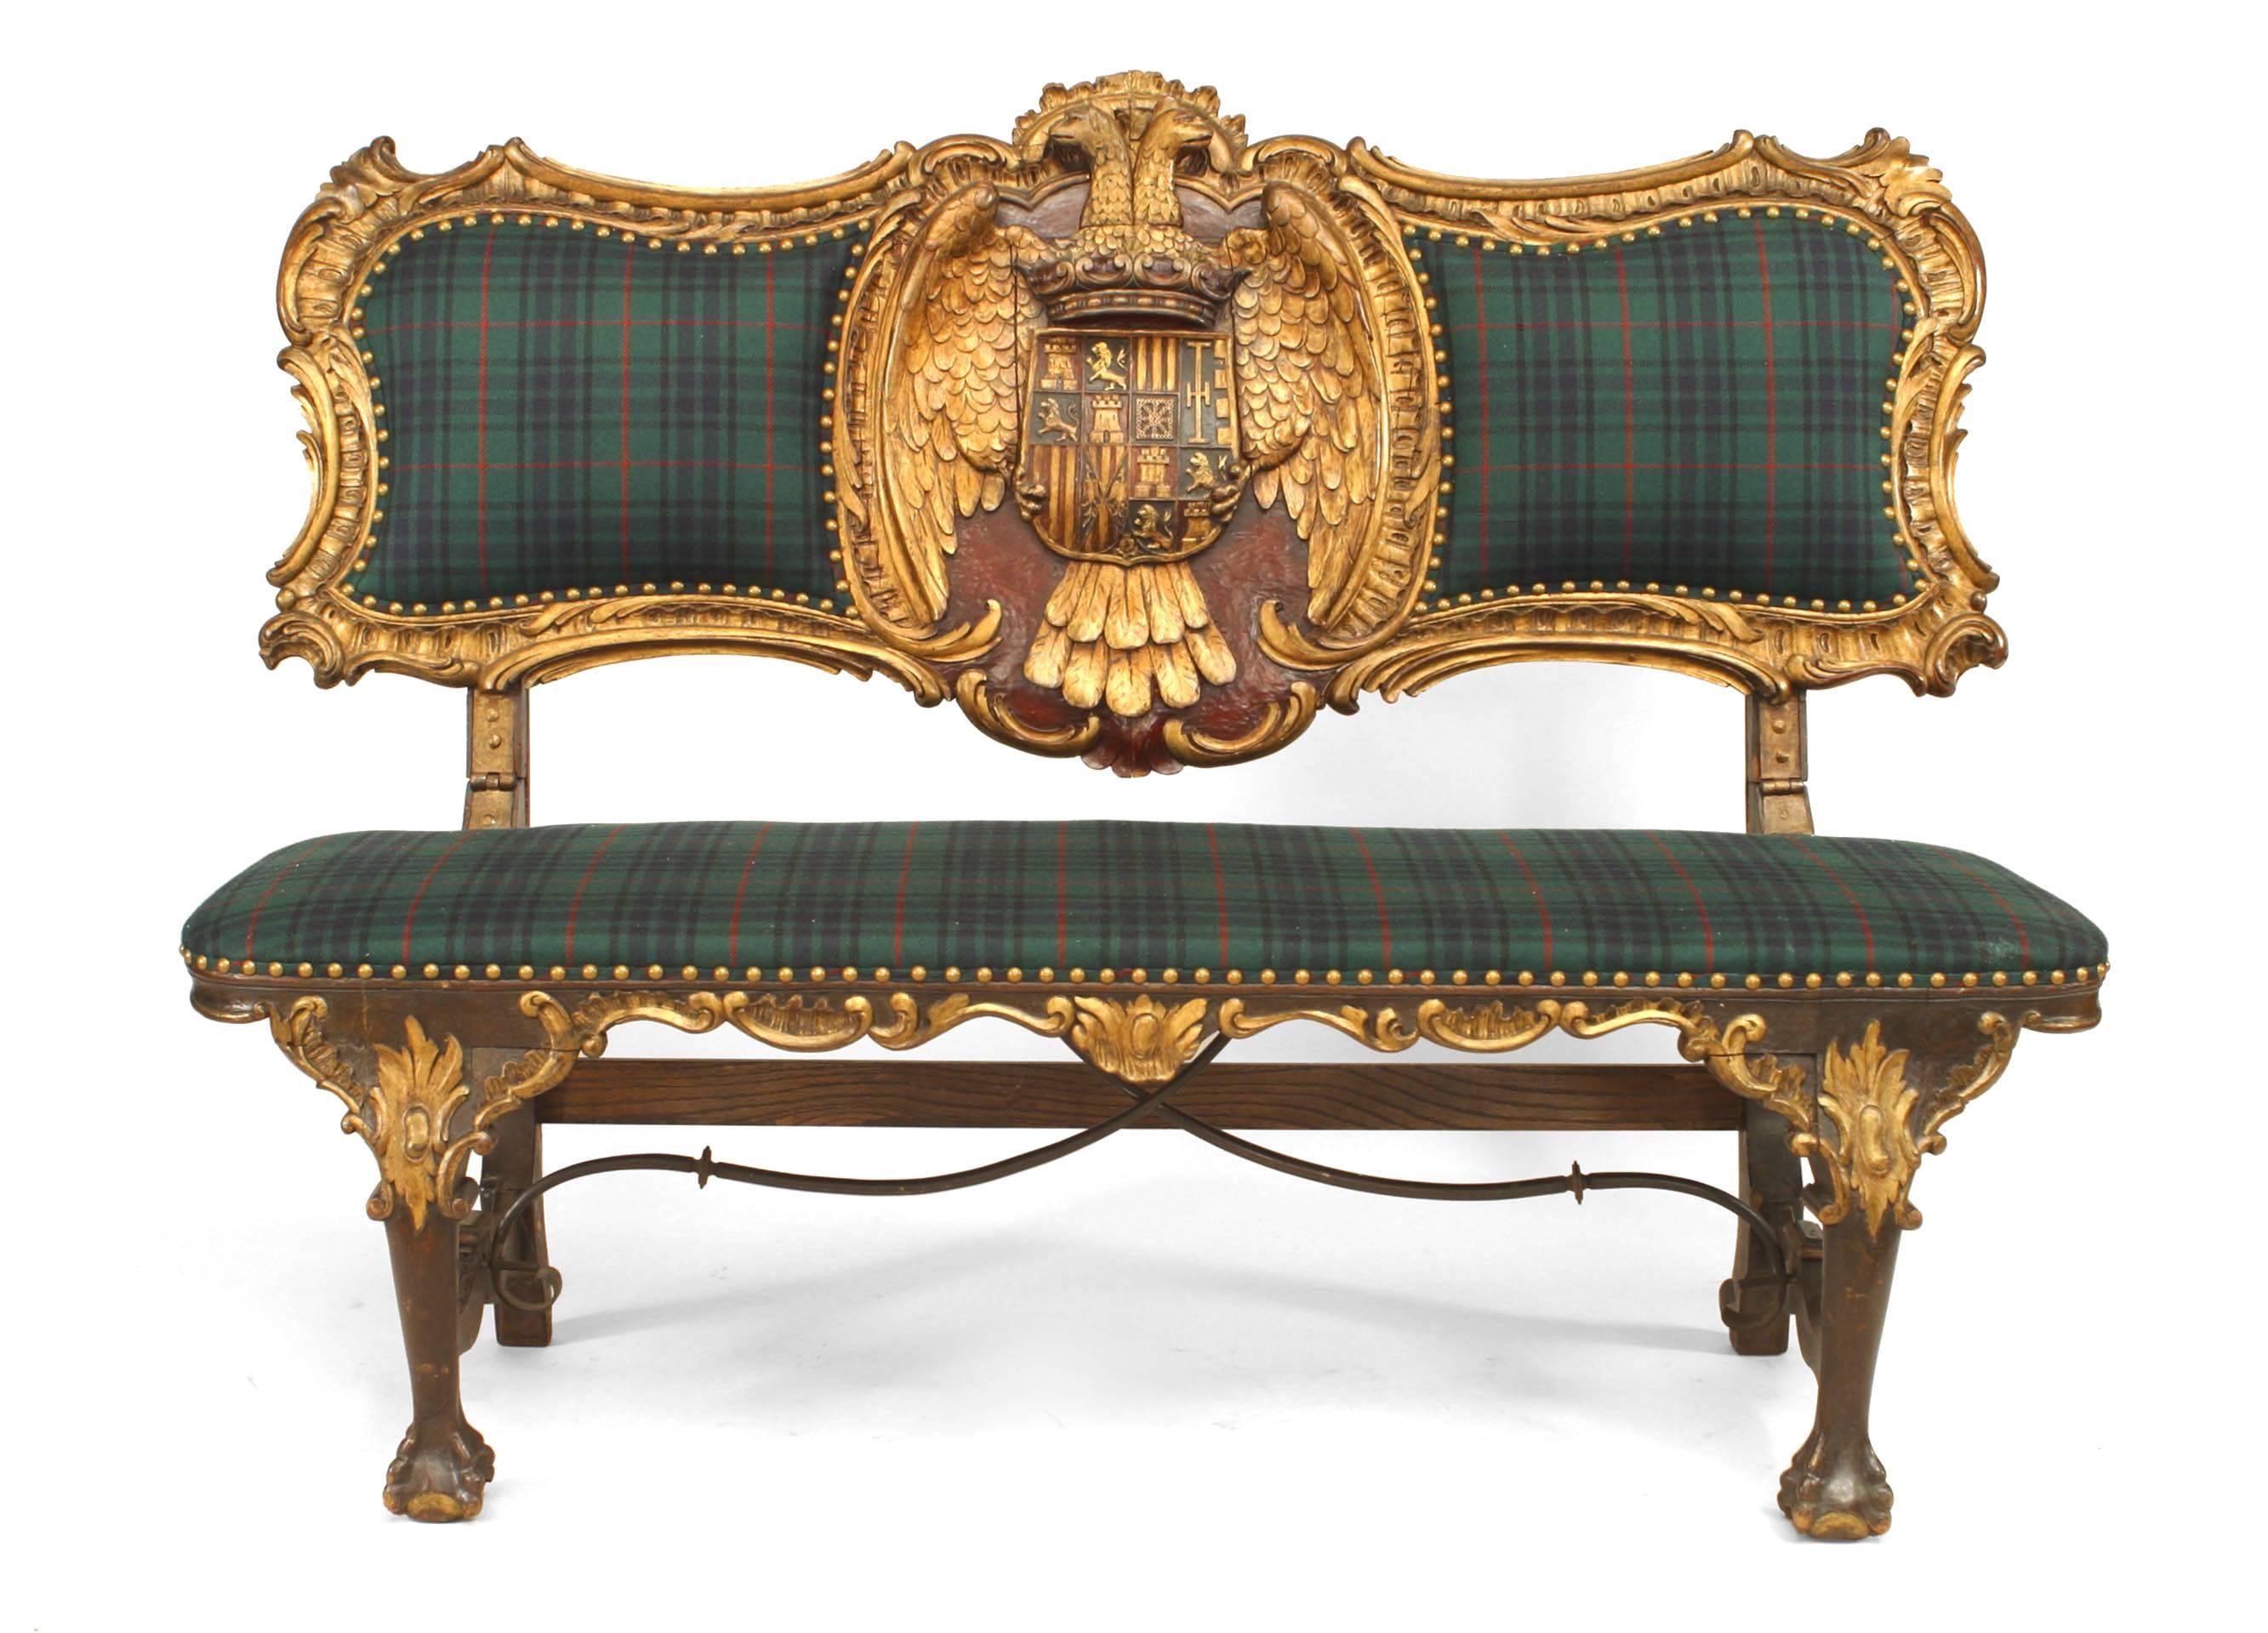 Austrian Hungarian (19th century) walnut and gilt trimmed loveseat with a back featuring a double eagle head crest between two upholstered panels and wrought iron stretcher.
  